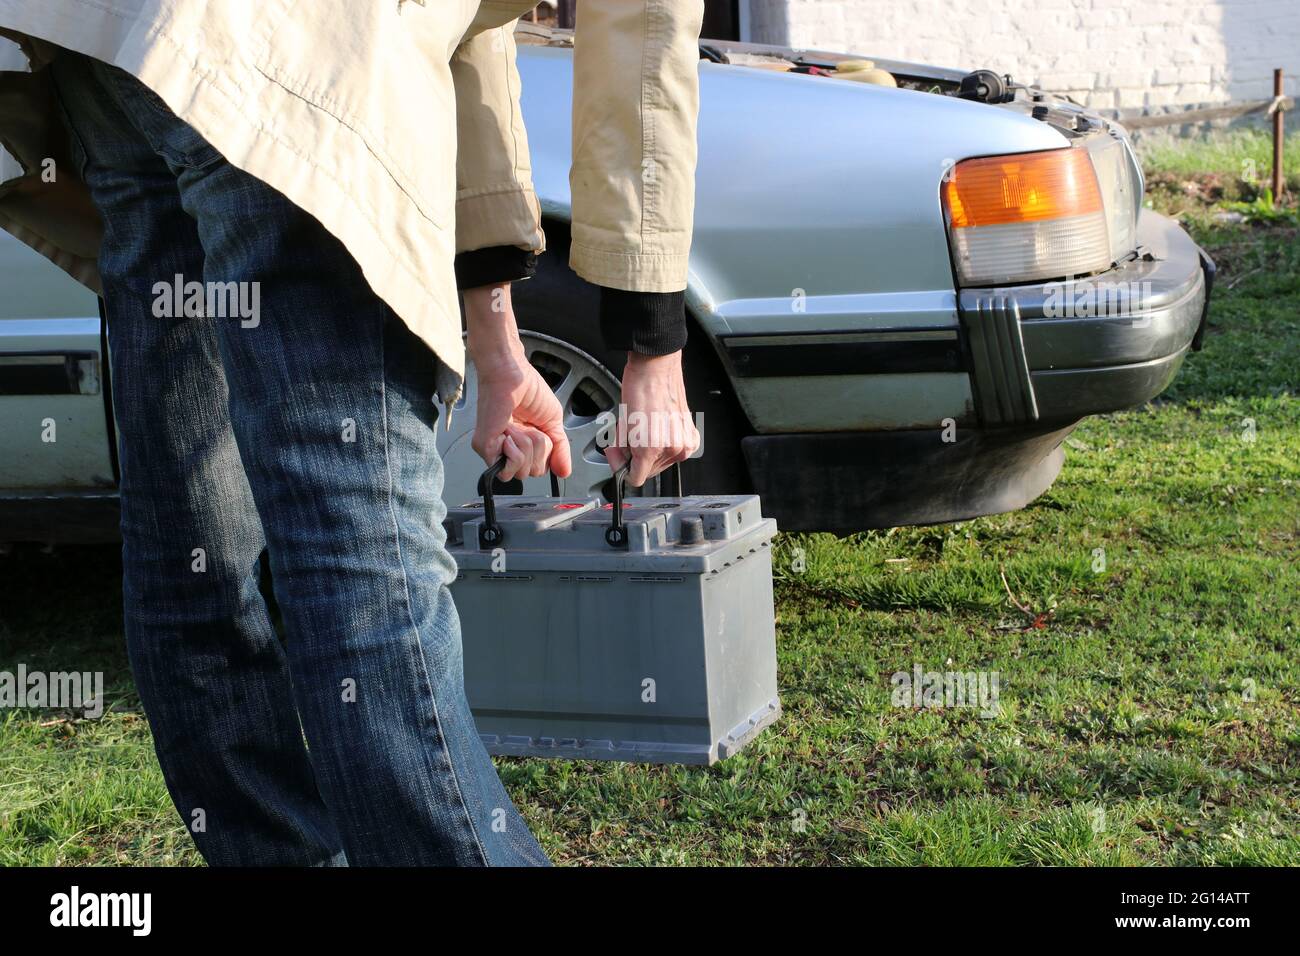 A woman carries a heavy car battery for installation in a car. Stock Photo